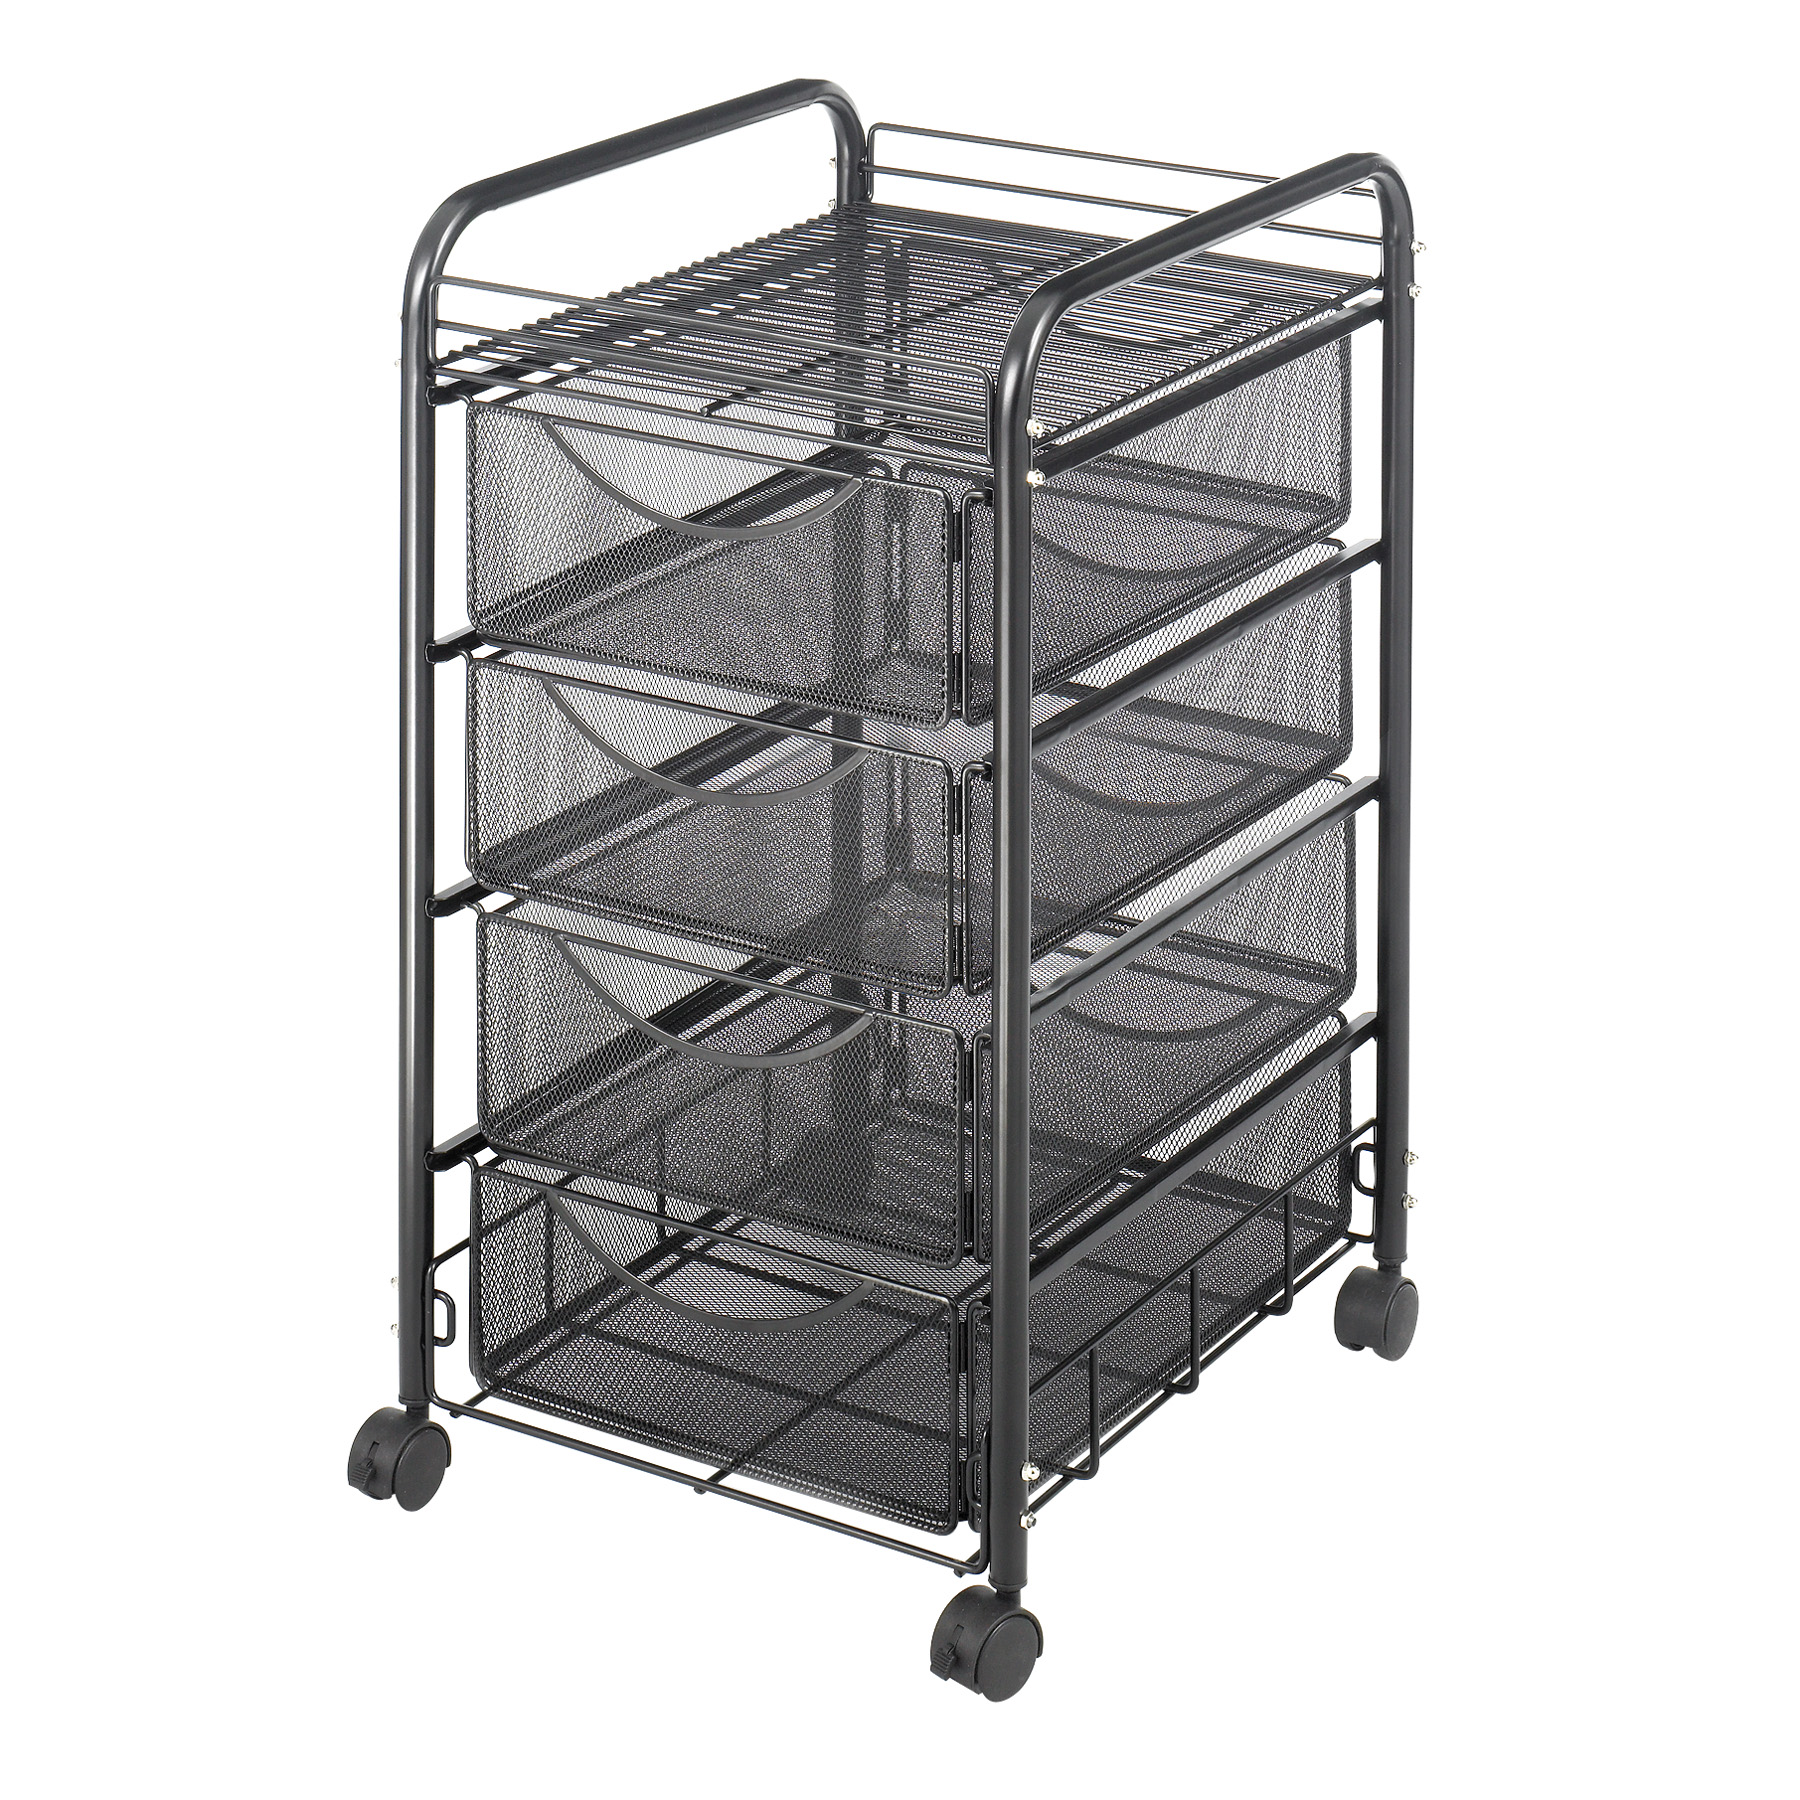 Safco Products 6240BL Onyx Mesh Fold-Up Shelving Black 